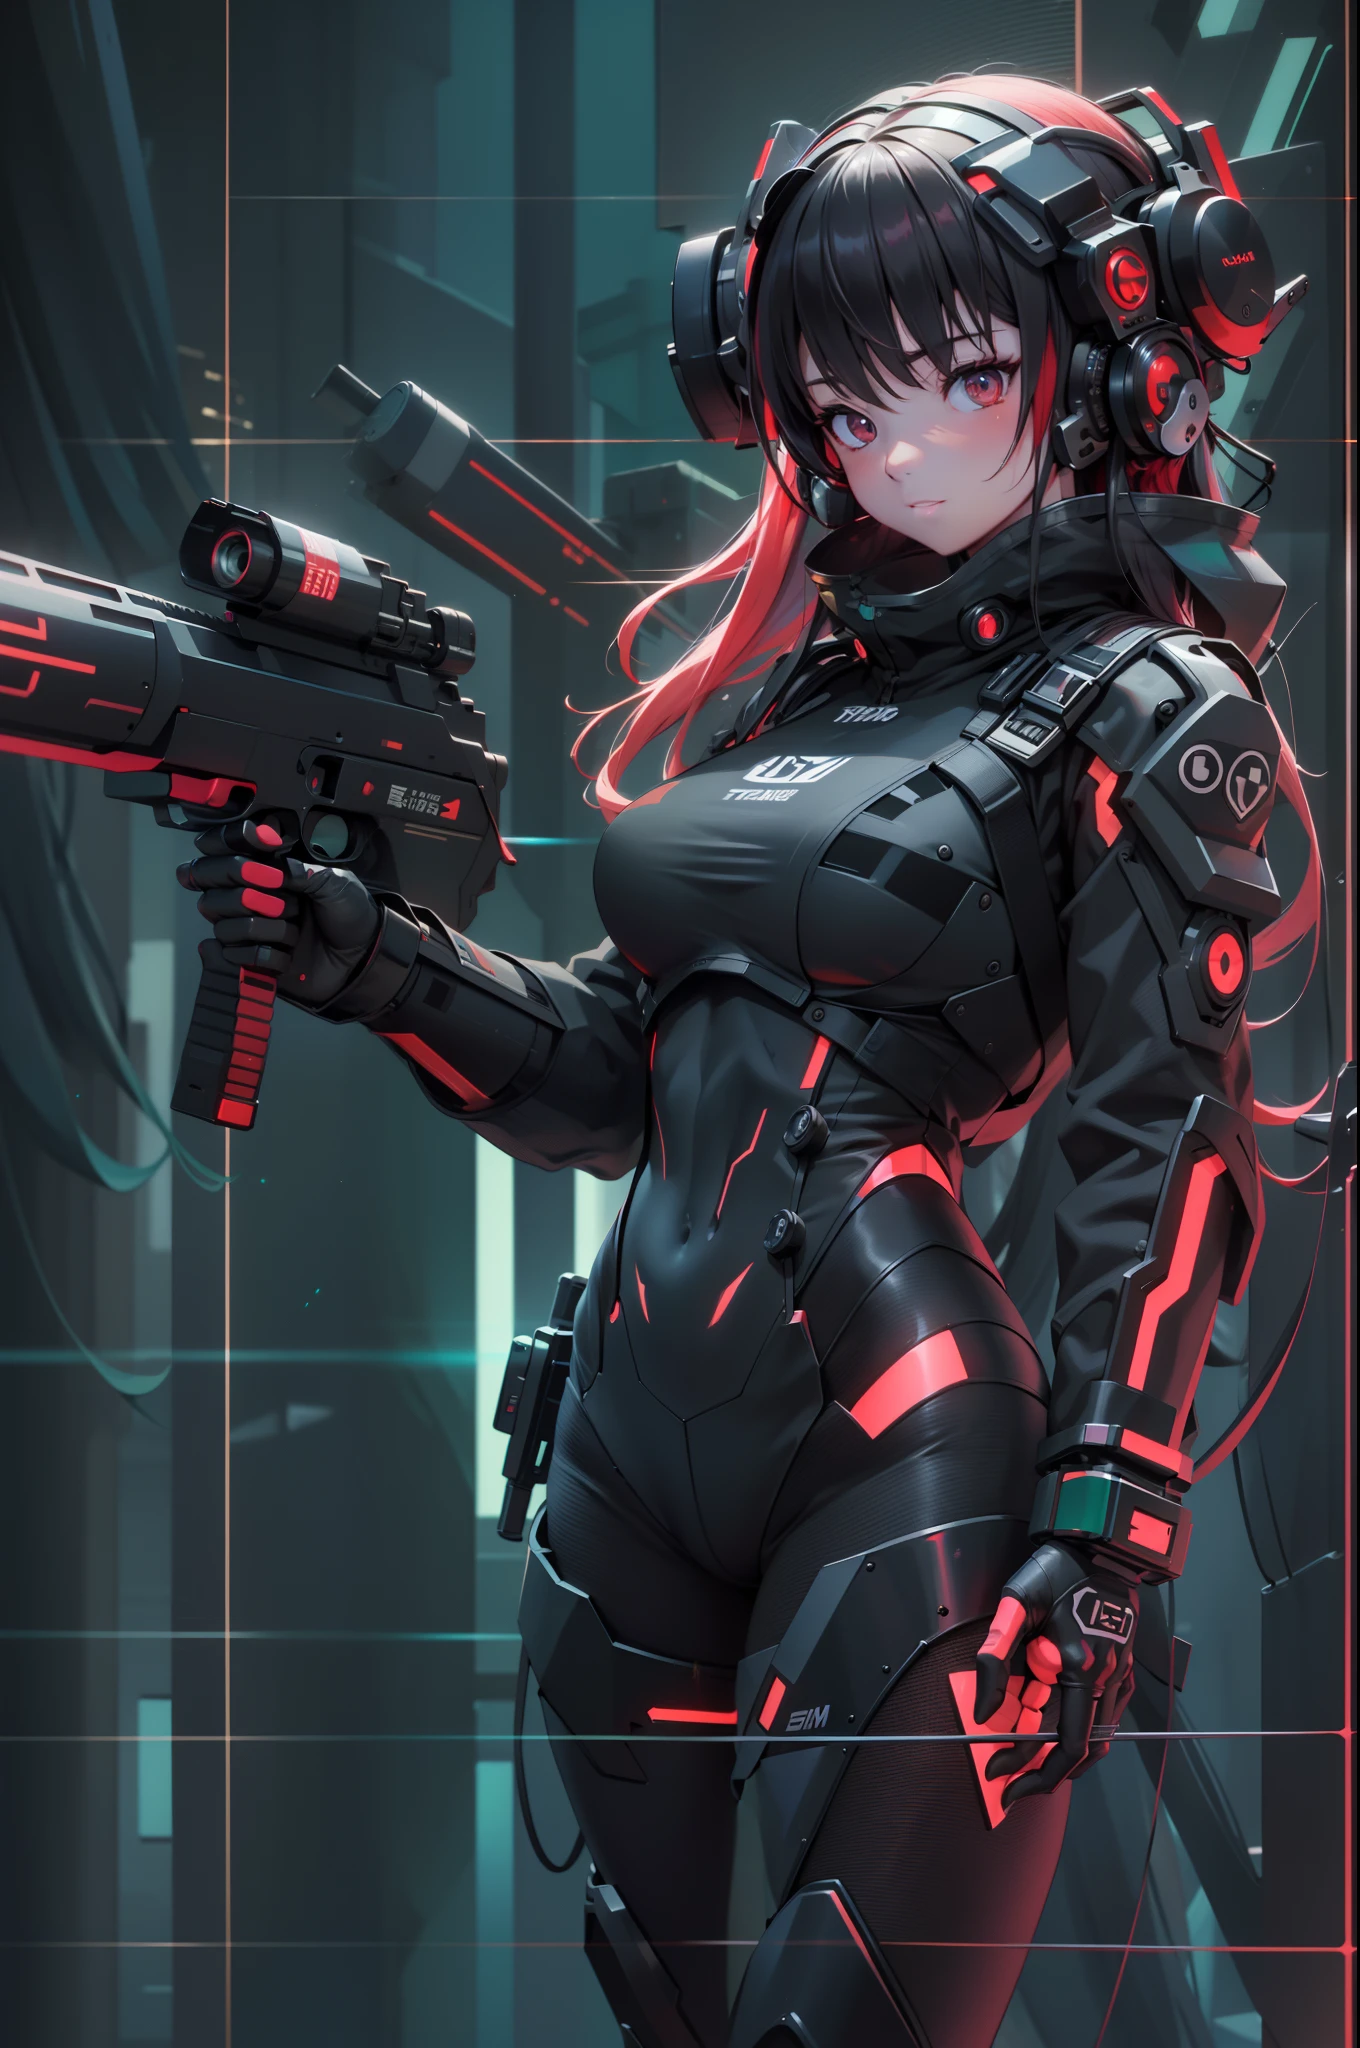 Muscle Special Forces Girl，eyes glowing,  Wearing black special forces equipment, Gun in hand, full bodyesbian, Shoot at knee level, Cyberpunk, neonlight, Futuristic, surrealist, Red，。.。.。.3D, Redshift, Maxon Cinema 4D, Quaixel Megascan rendering, Doomsday colors, Red light, Futuristic, 1/3, High detail, Ultra high quality, illusory engine, 8K,